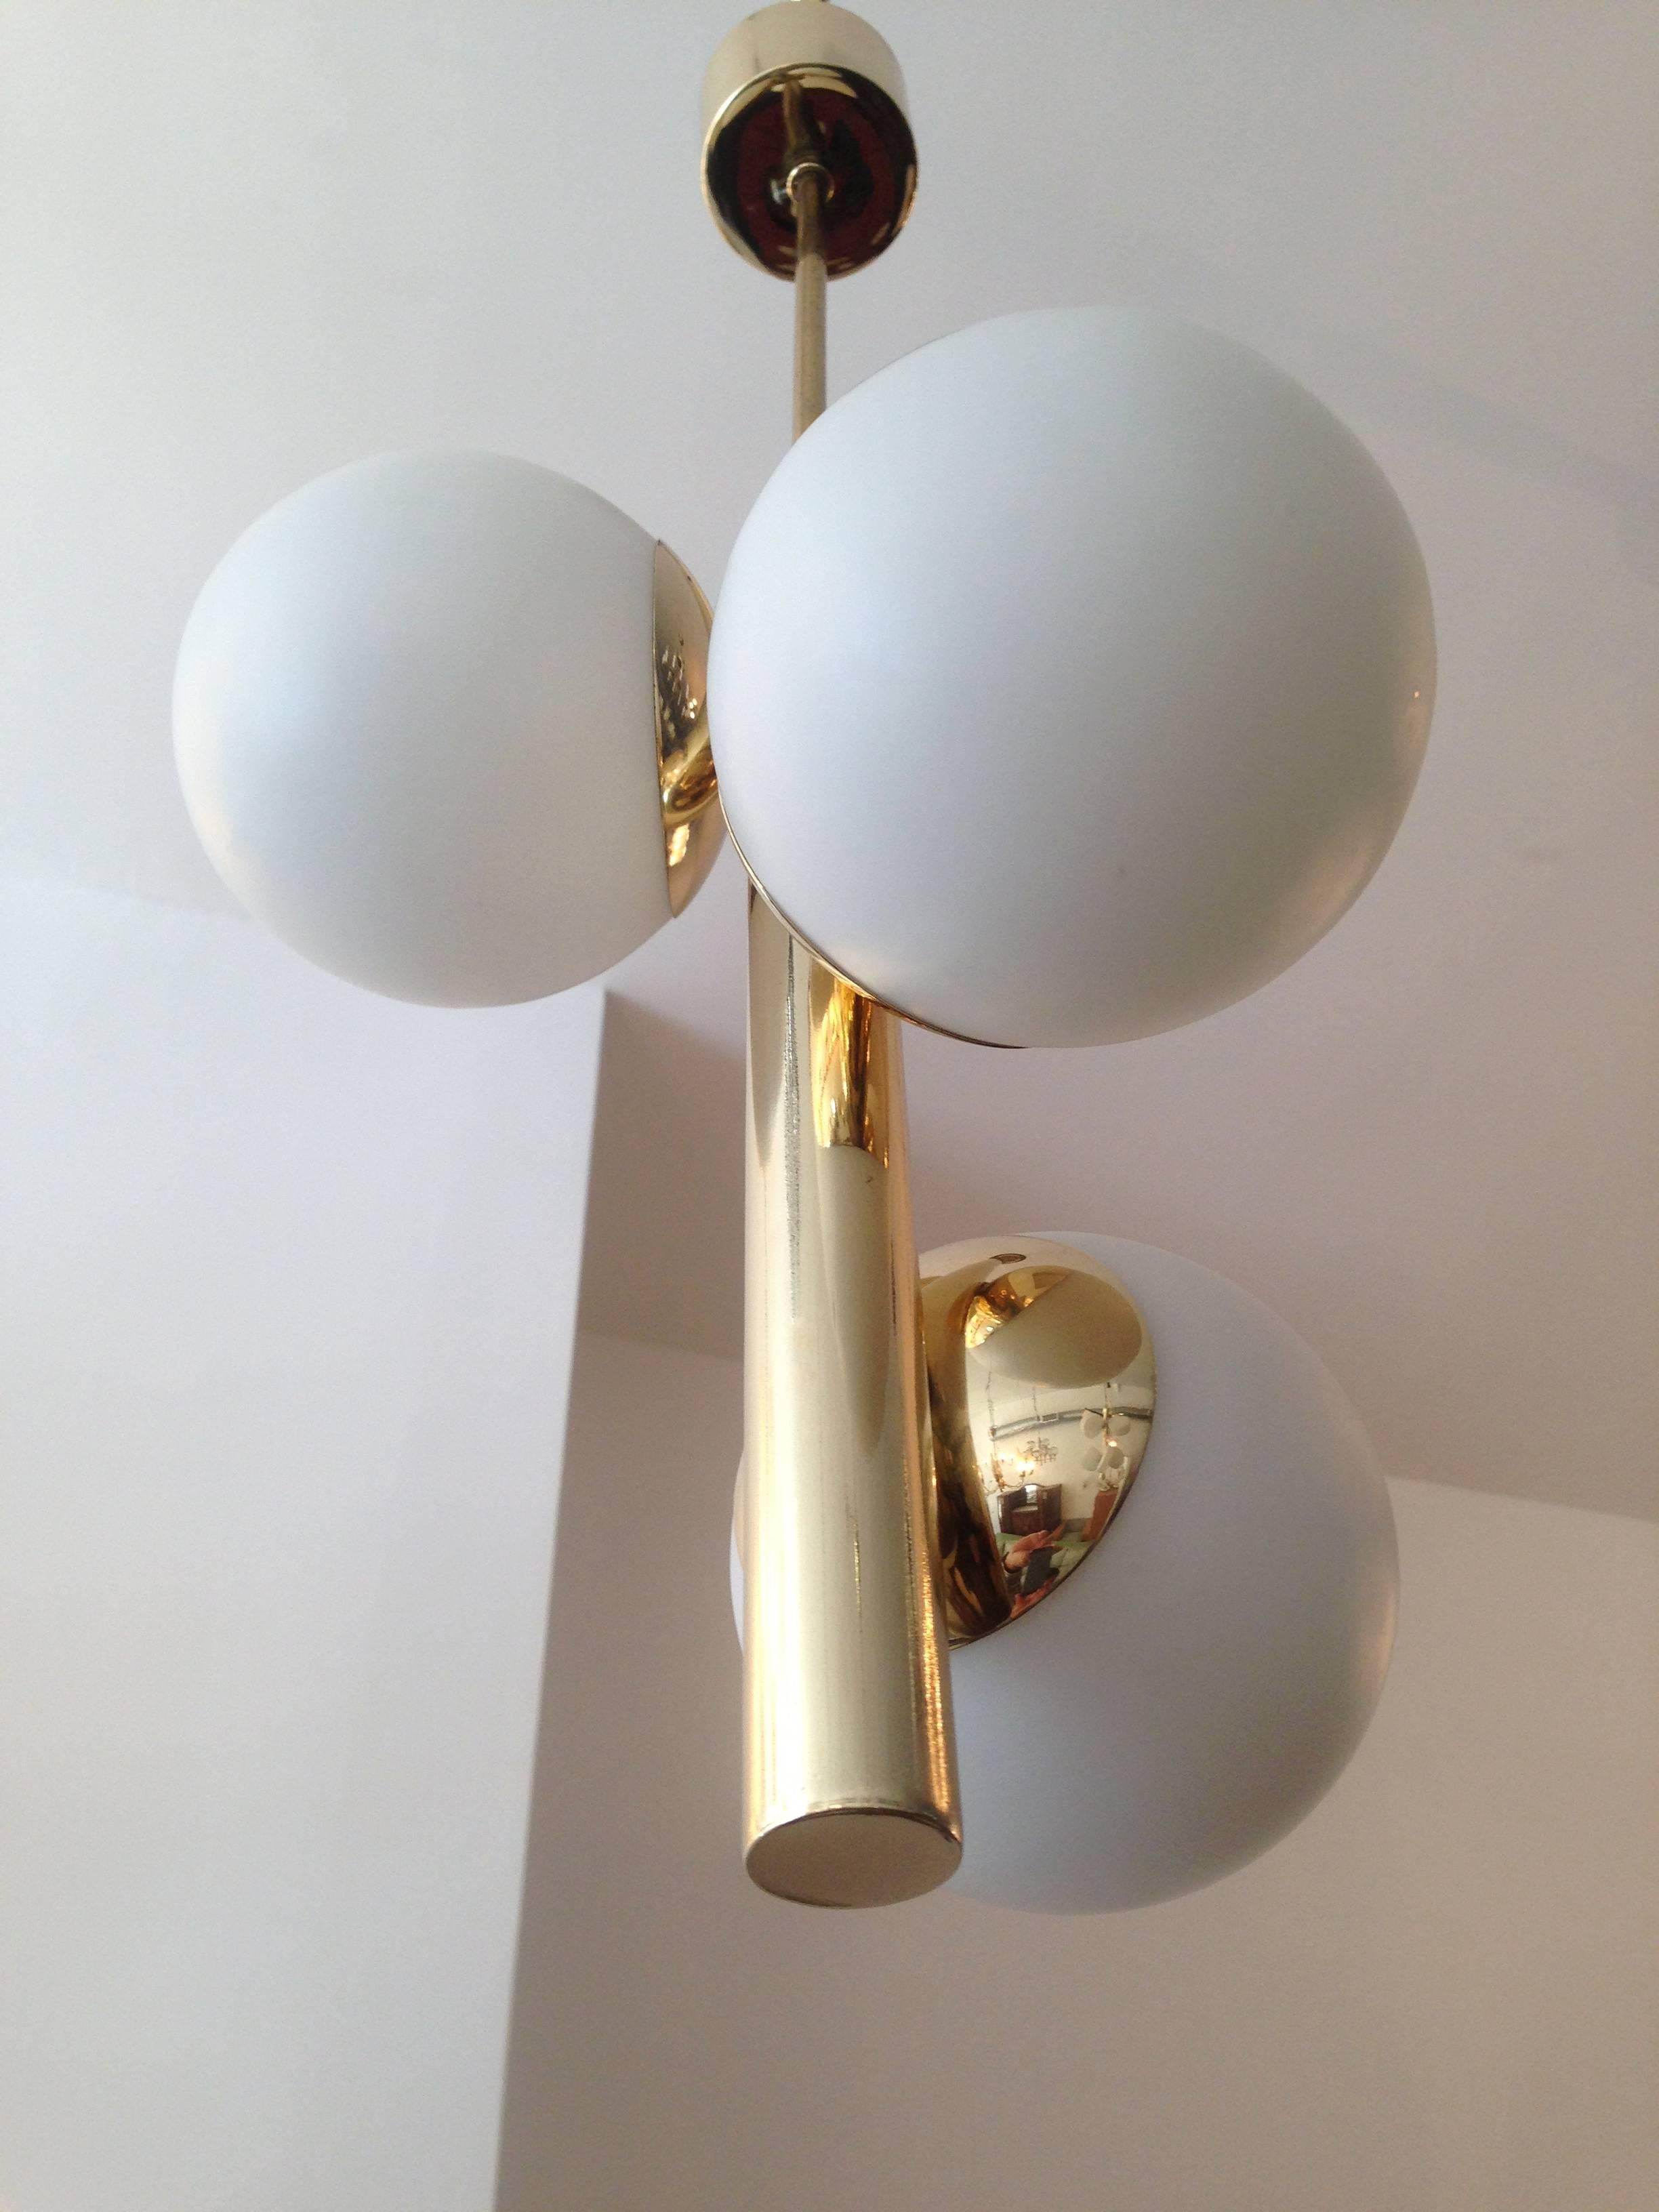 A great set of three Italian pendants composed of polished brass fixtures and matte white glass ball shades. Rewired.